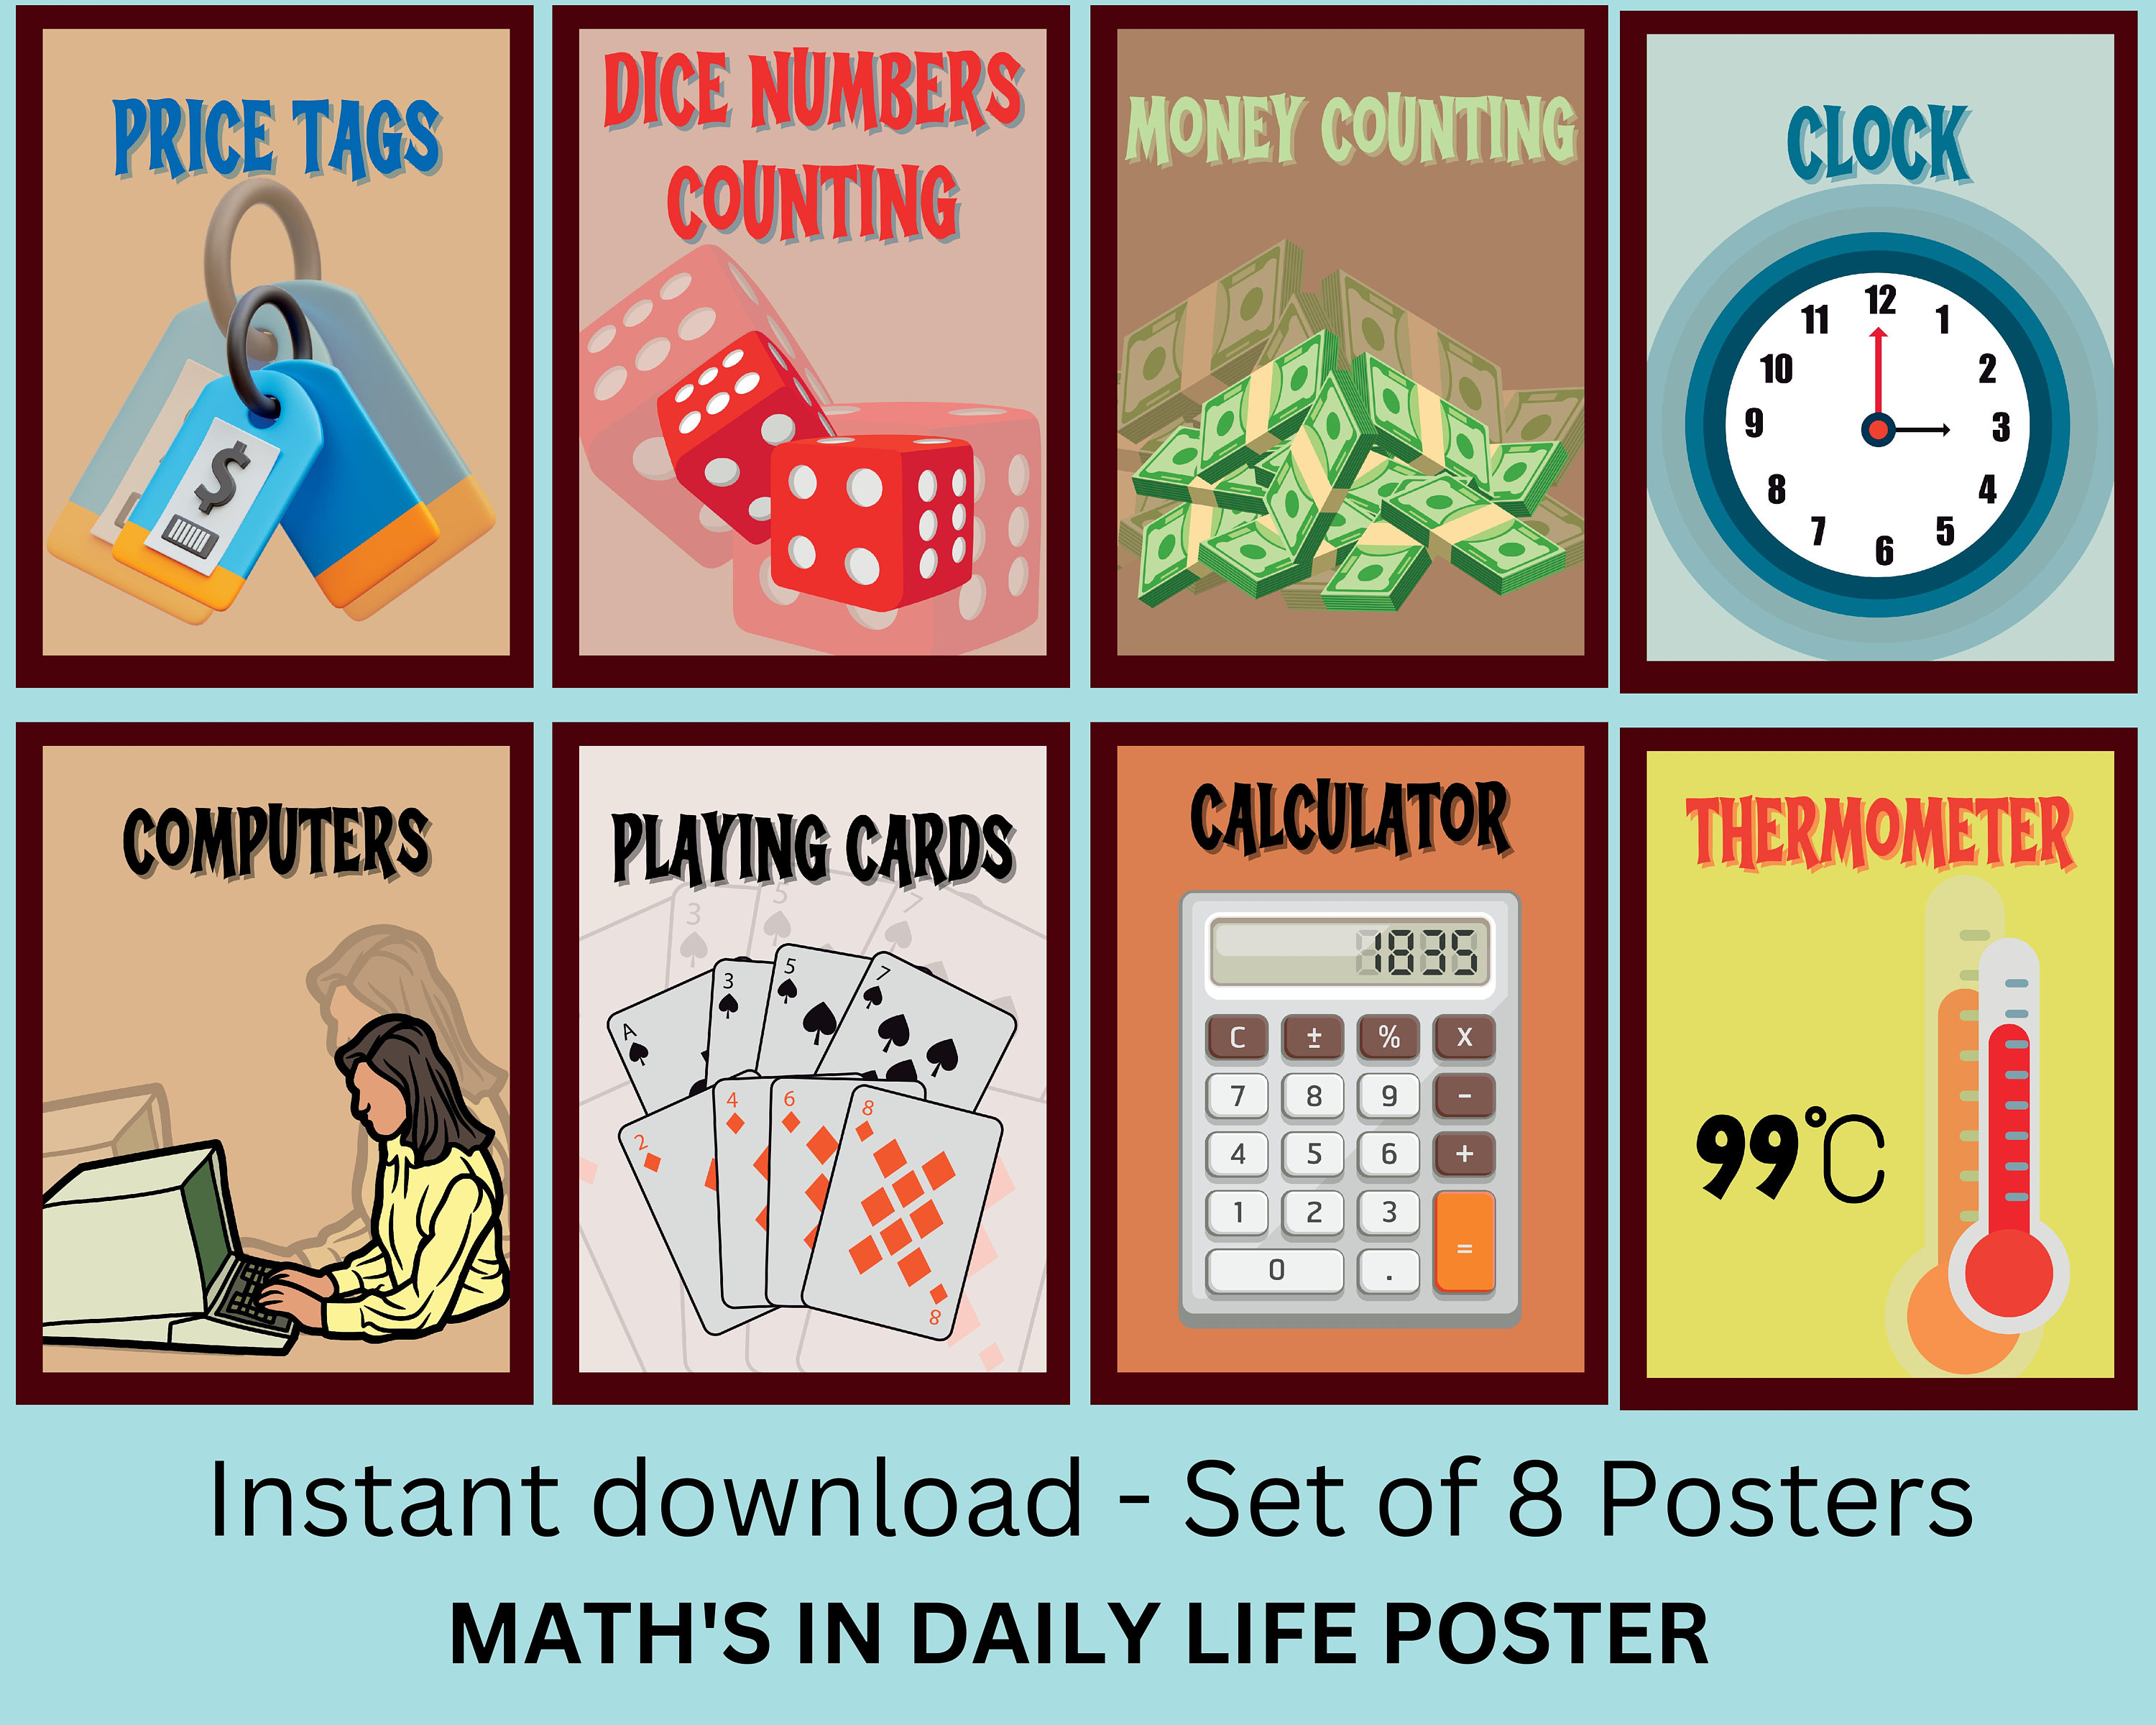 maths-in-daily-life-posters-set-of-8-poster-on-mathematics-etsy-uk